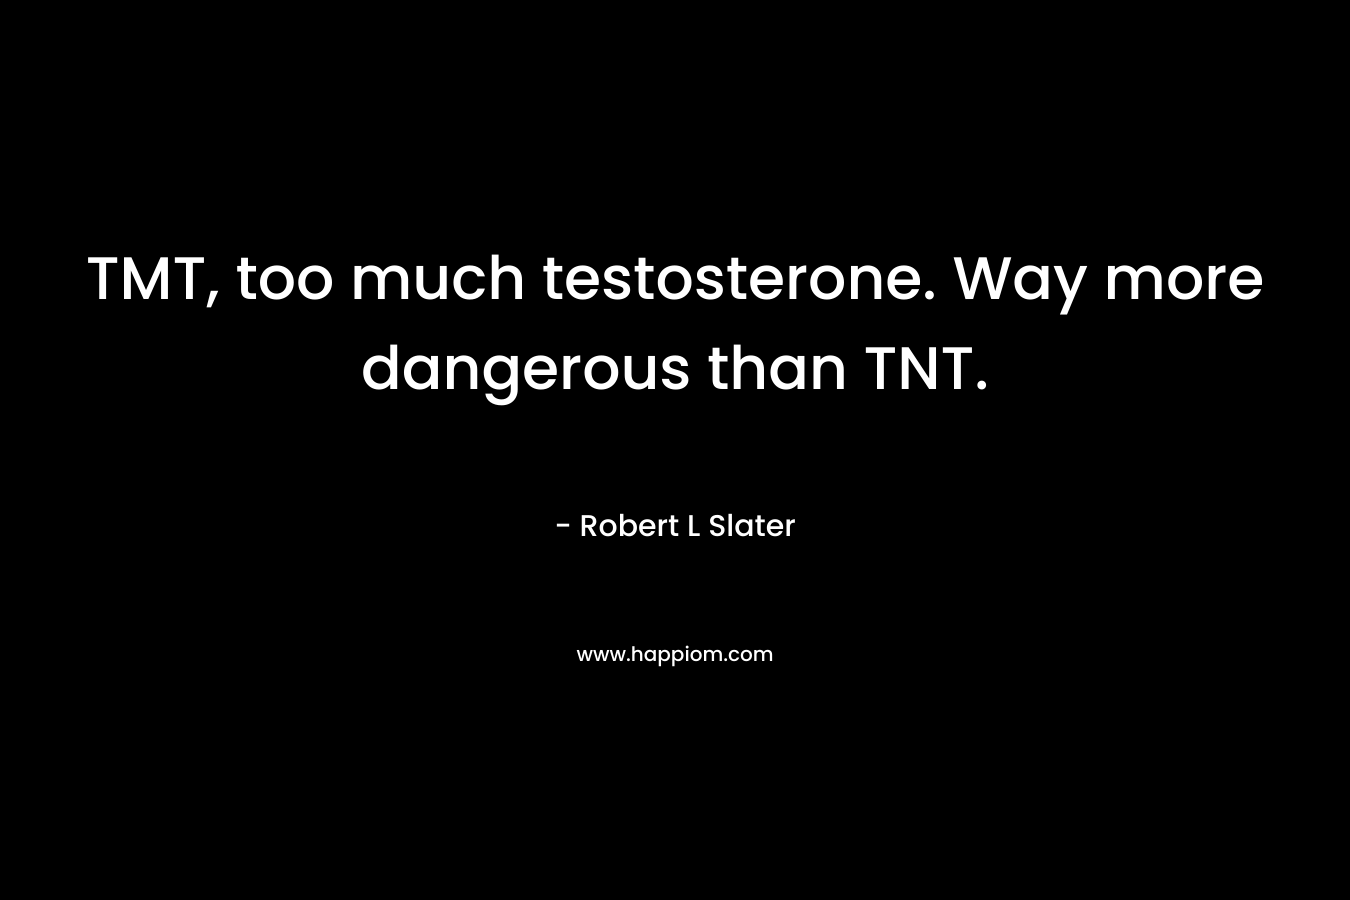 TMT, too much testosterone. Way more dangerous than TNT. – Robert L Slater